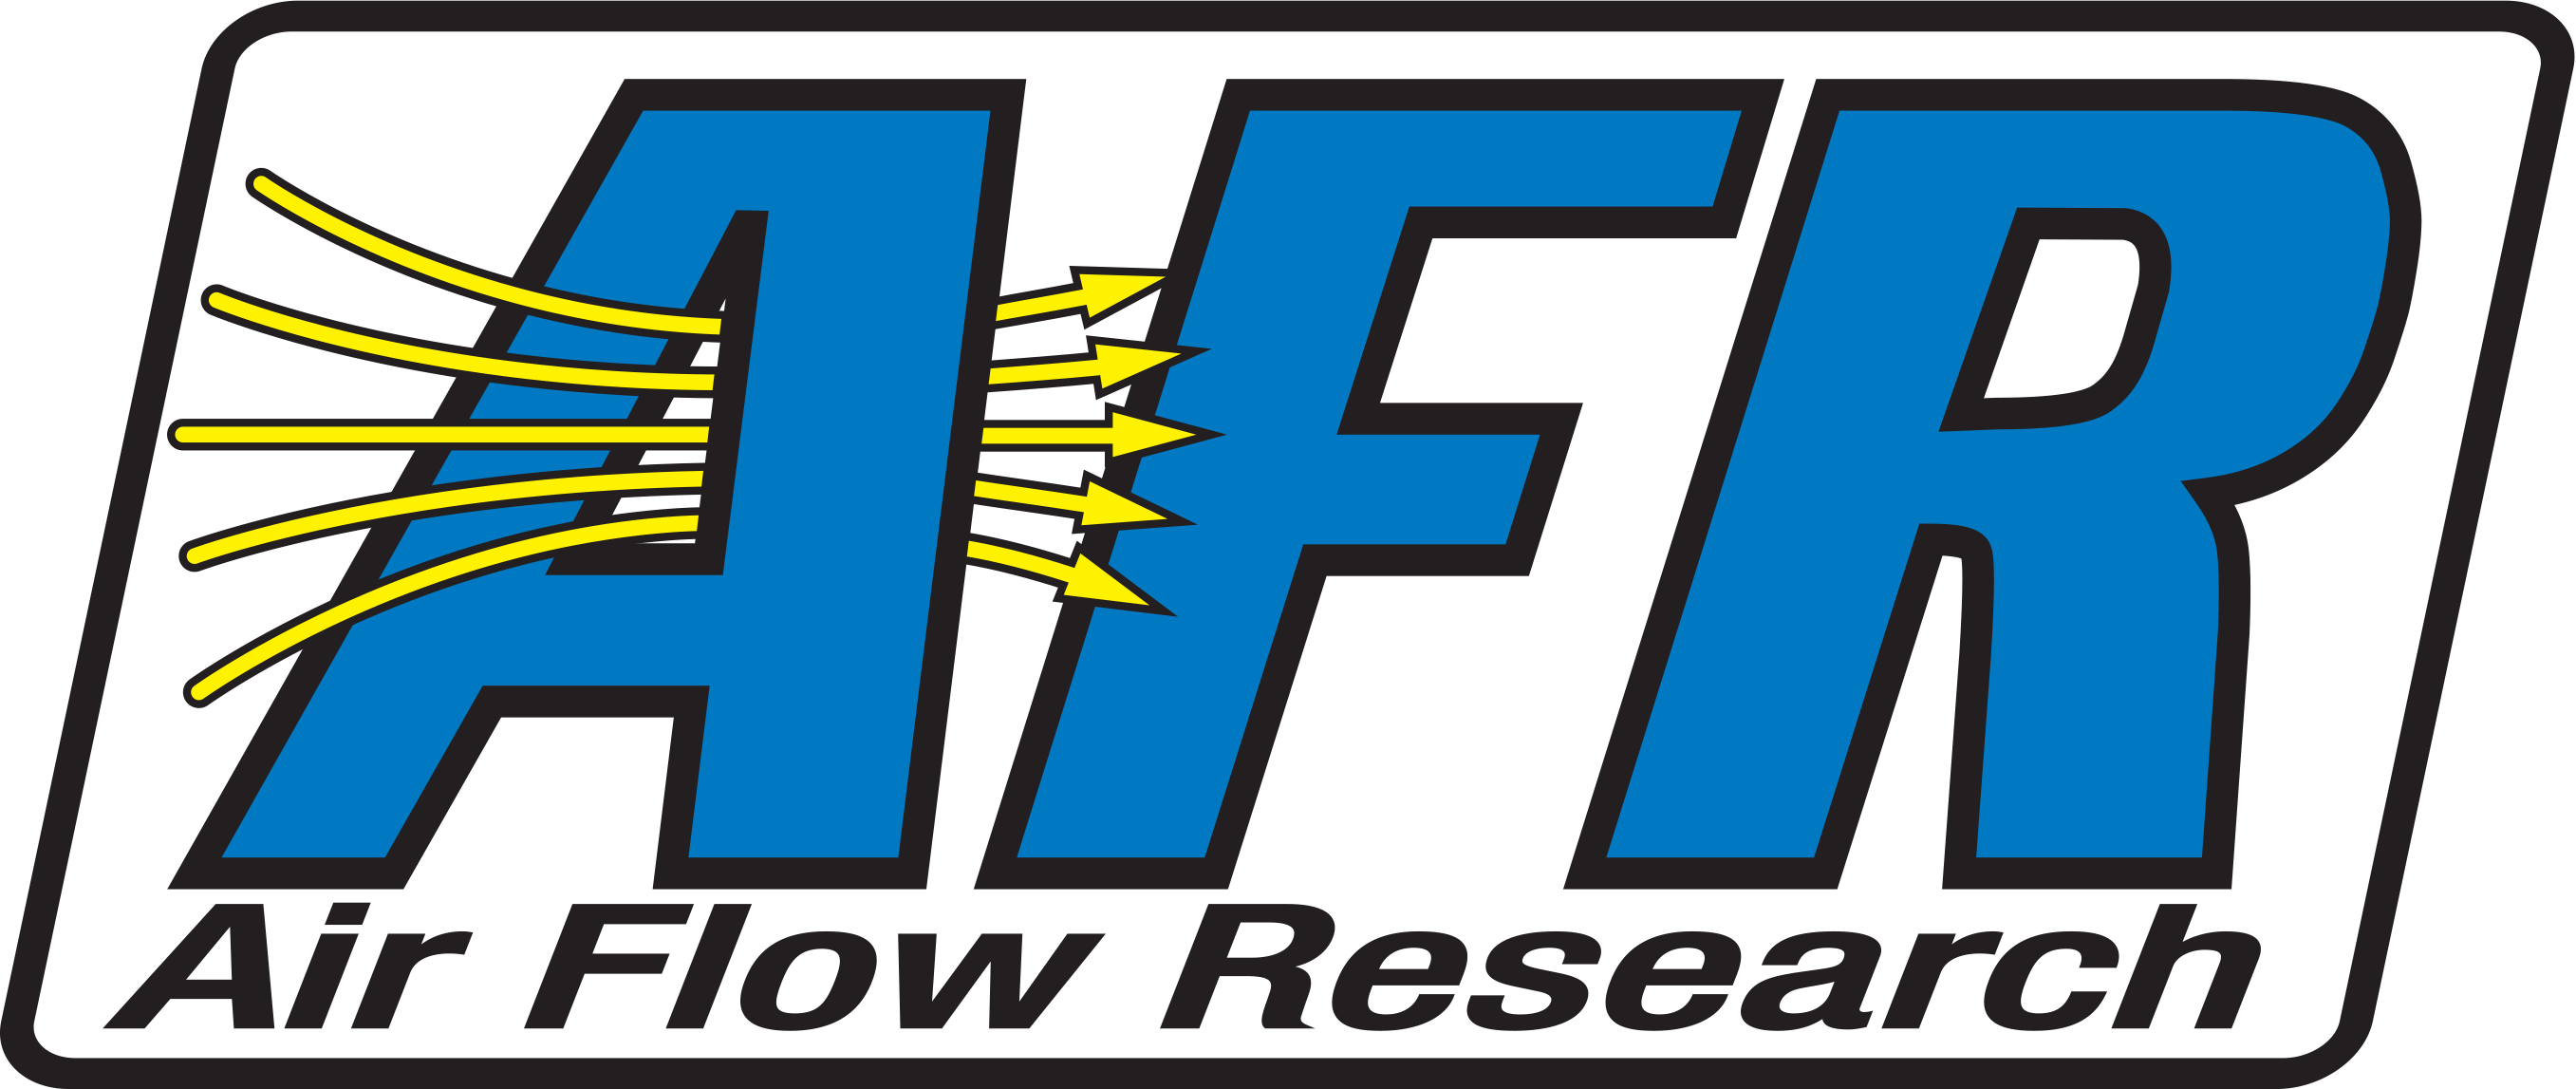 Air Flow Research (9719) Apparel/Promotional